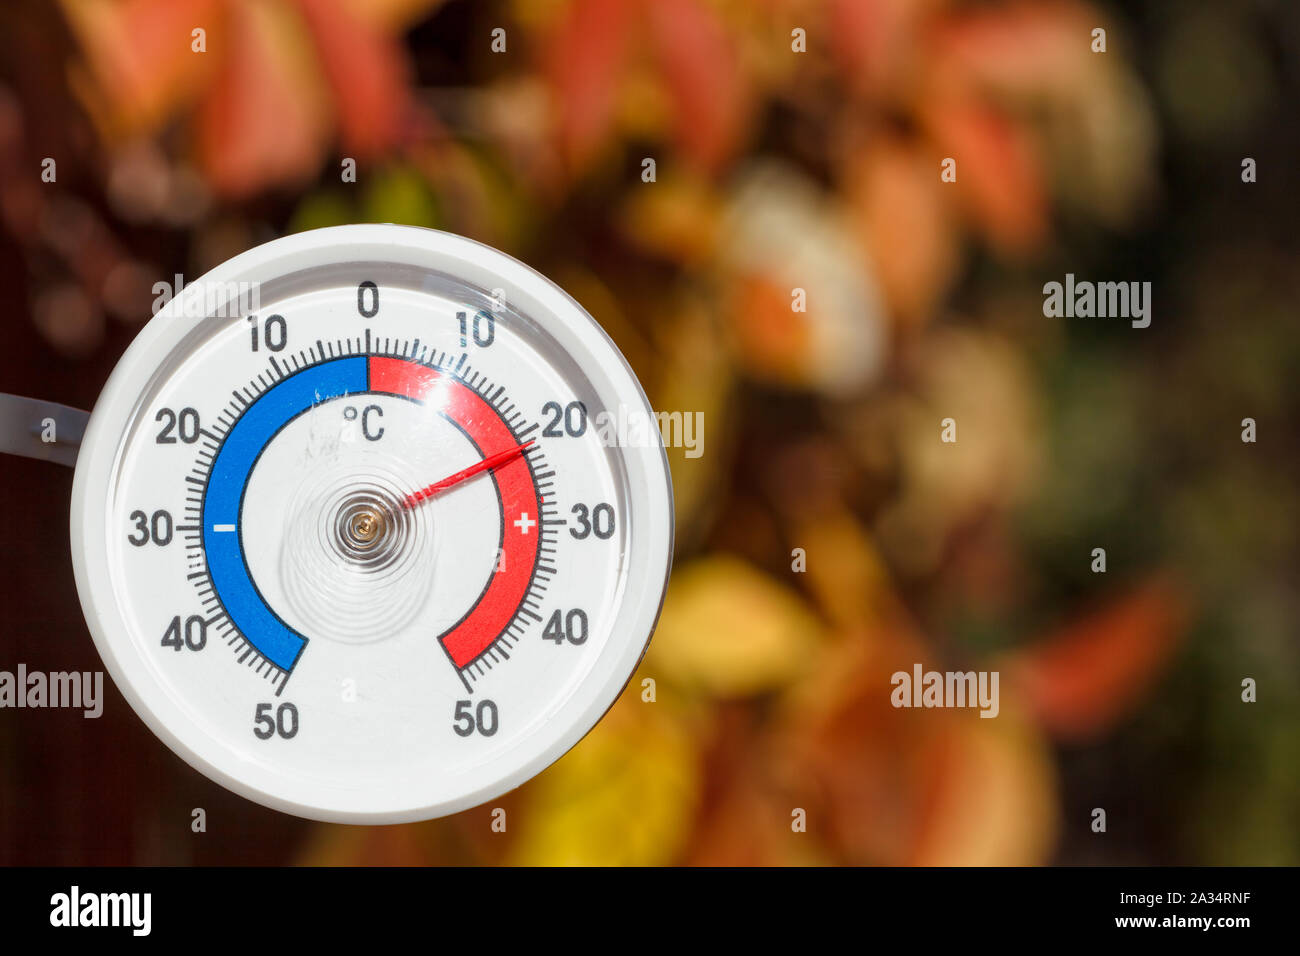 Outdoor thermometer with celsius scale showing warm temperature, blurred autumn leaves seen in background - hot indian summer or global warming concep Stock Photo